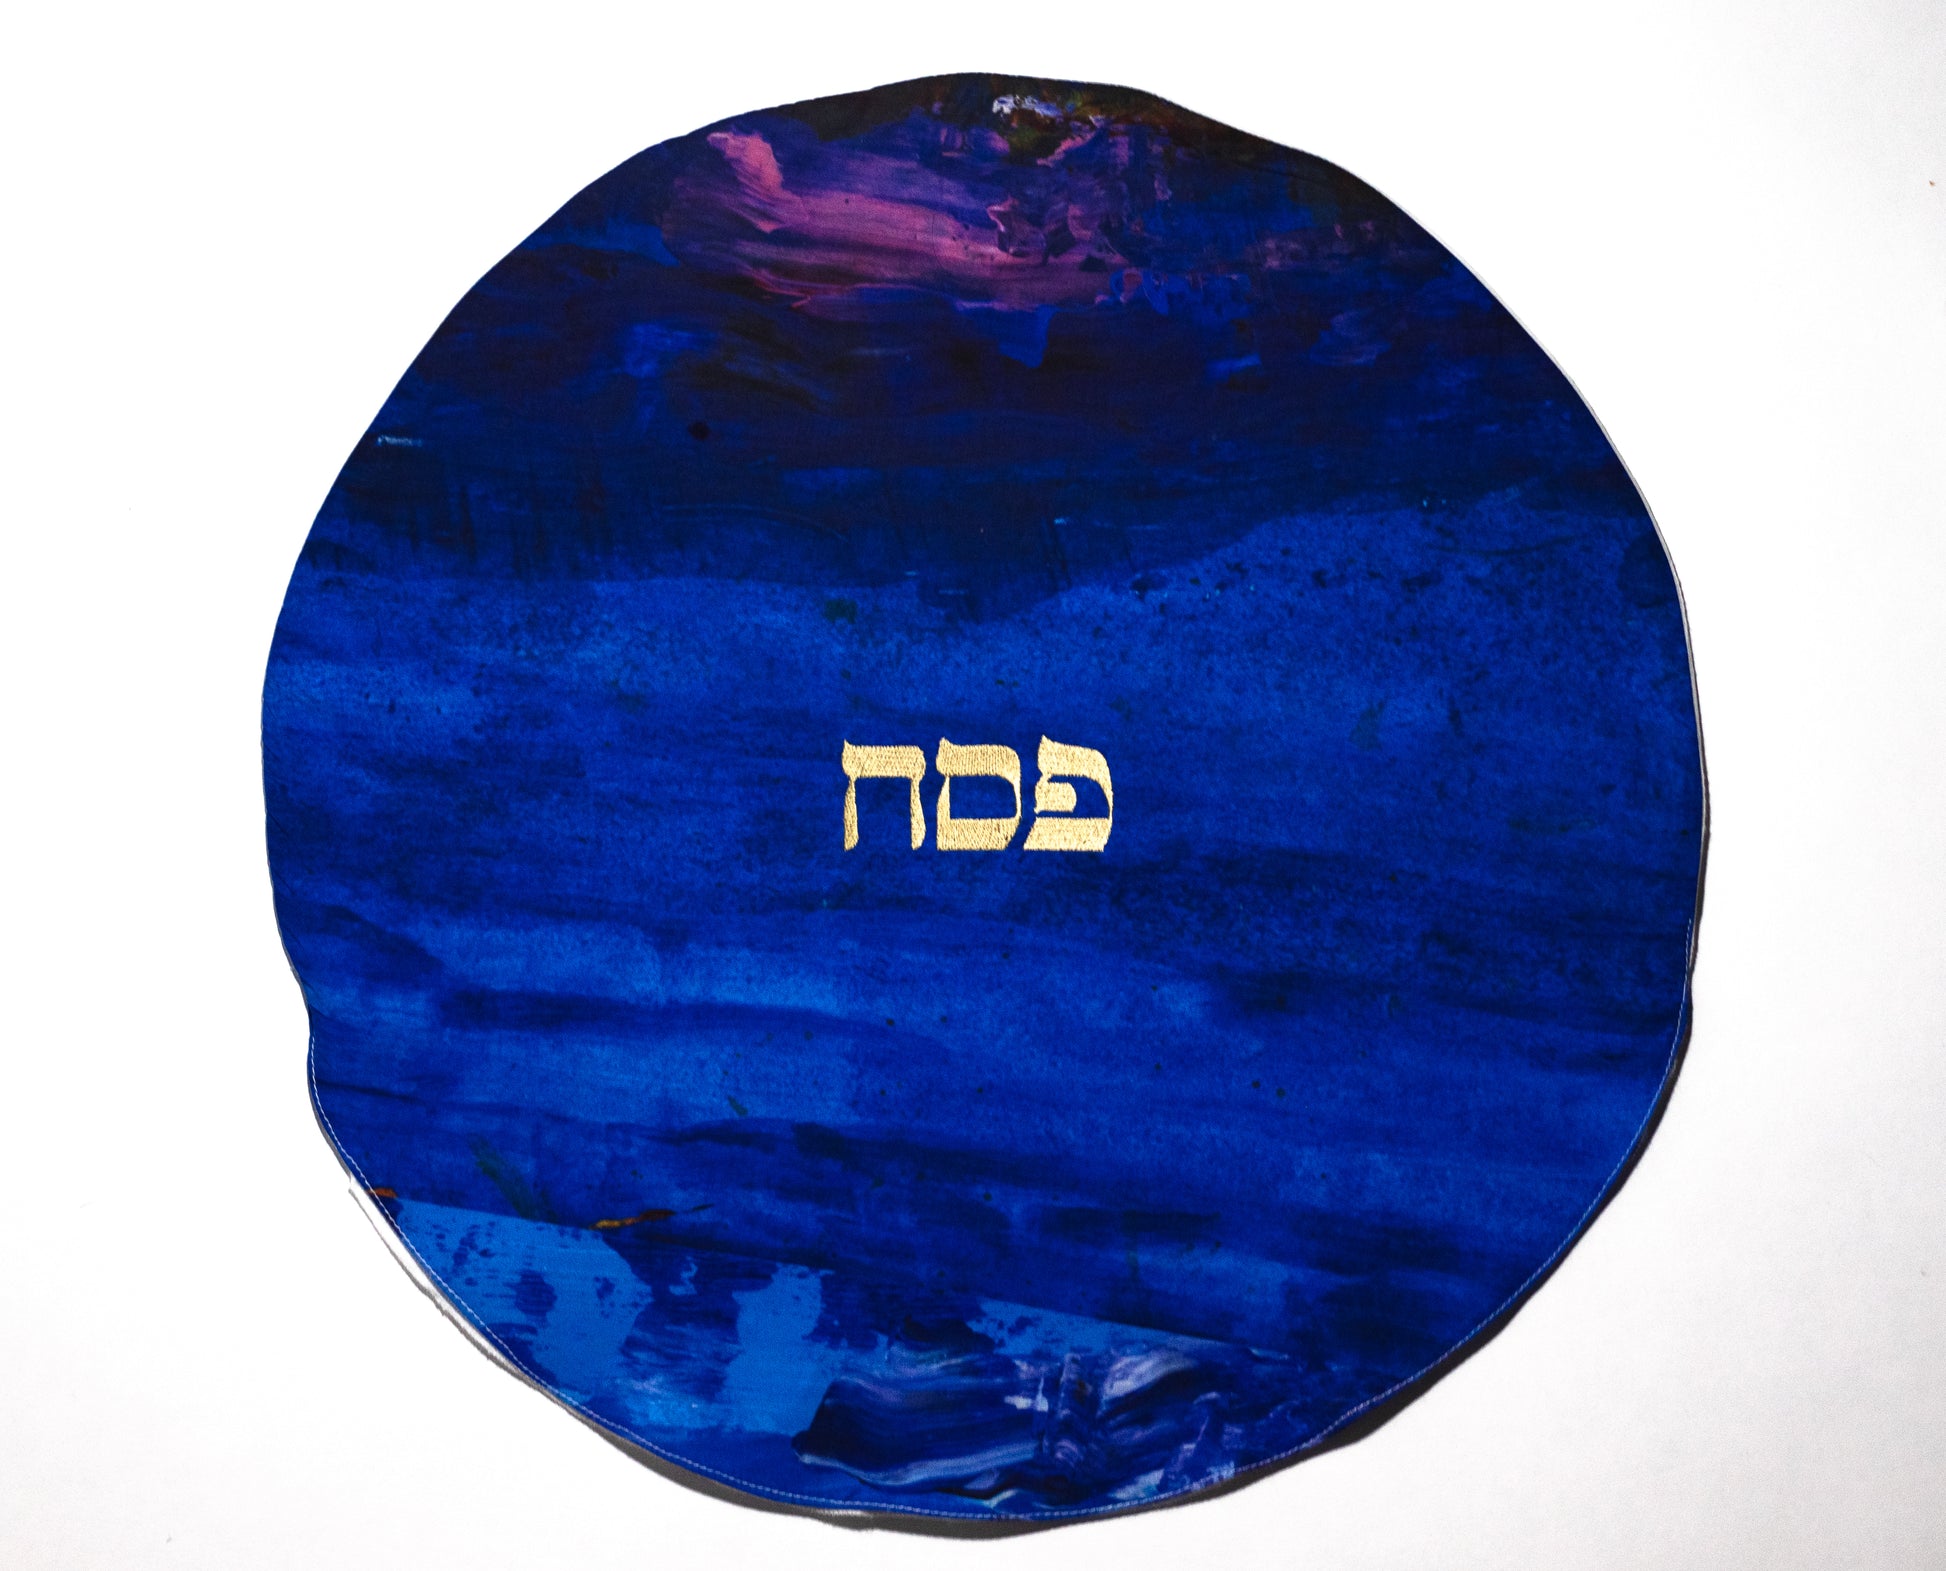 matzah cover with pesach in hebrew